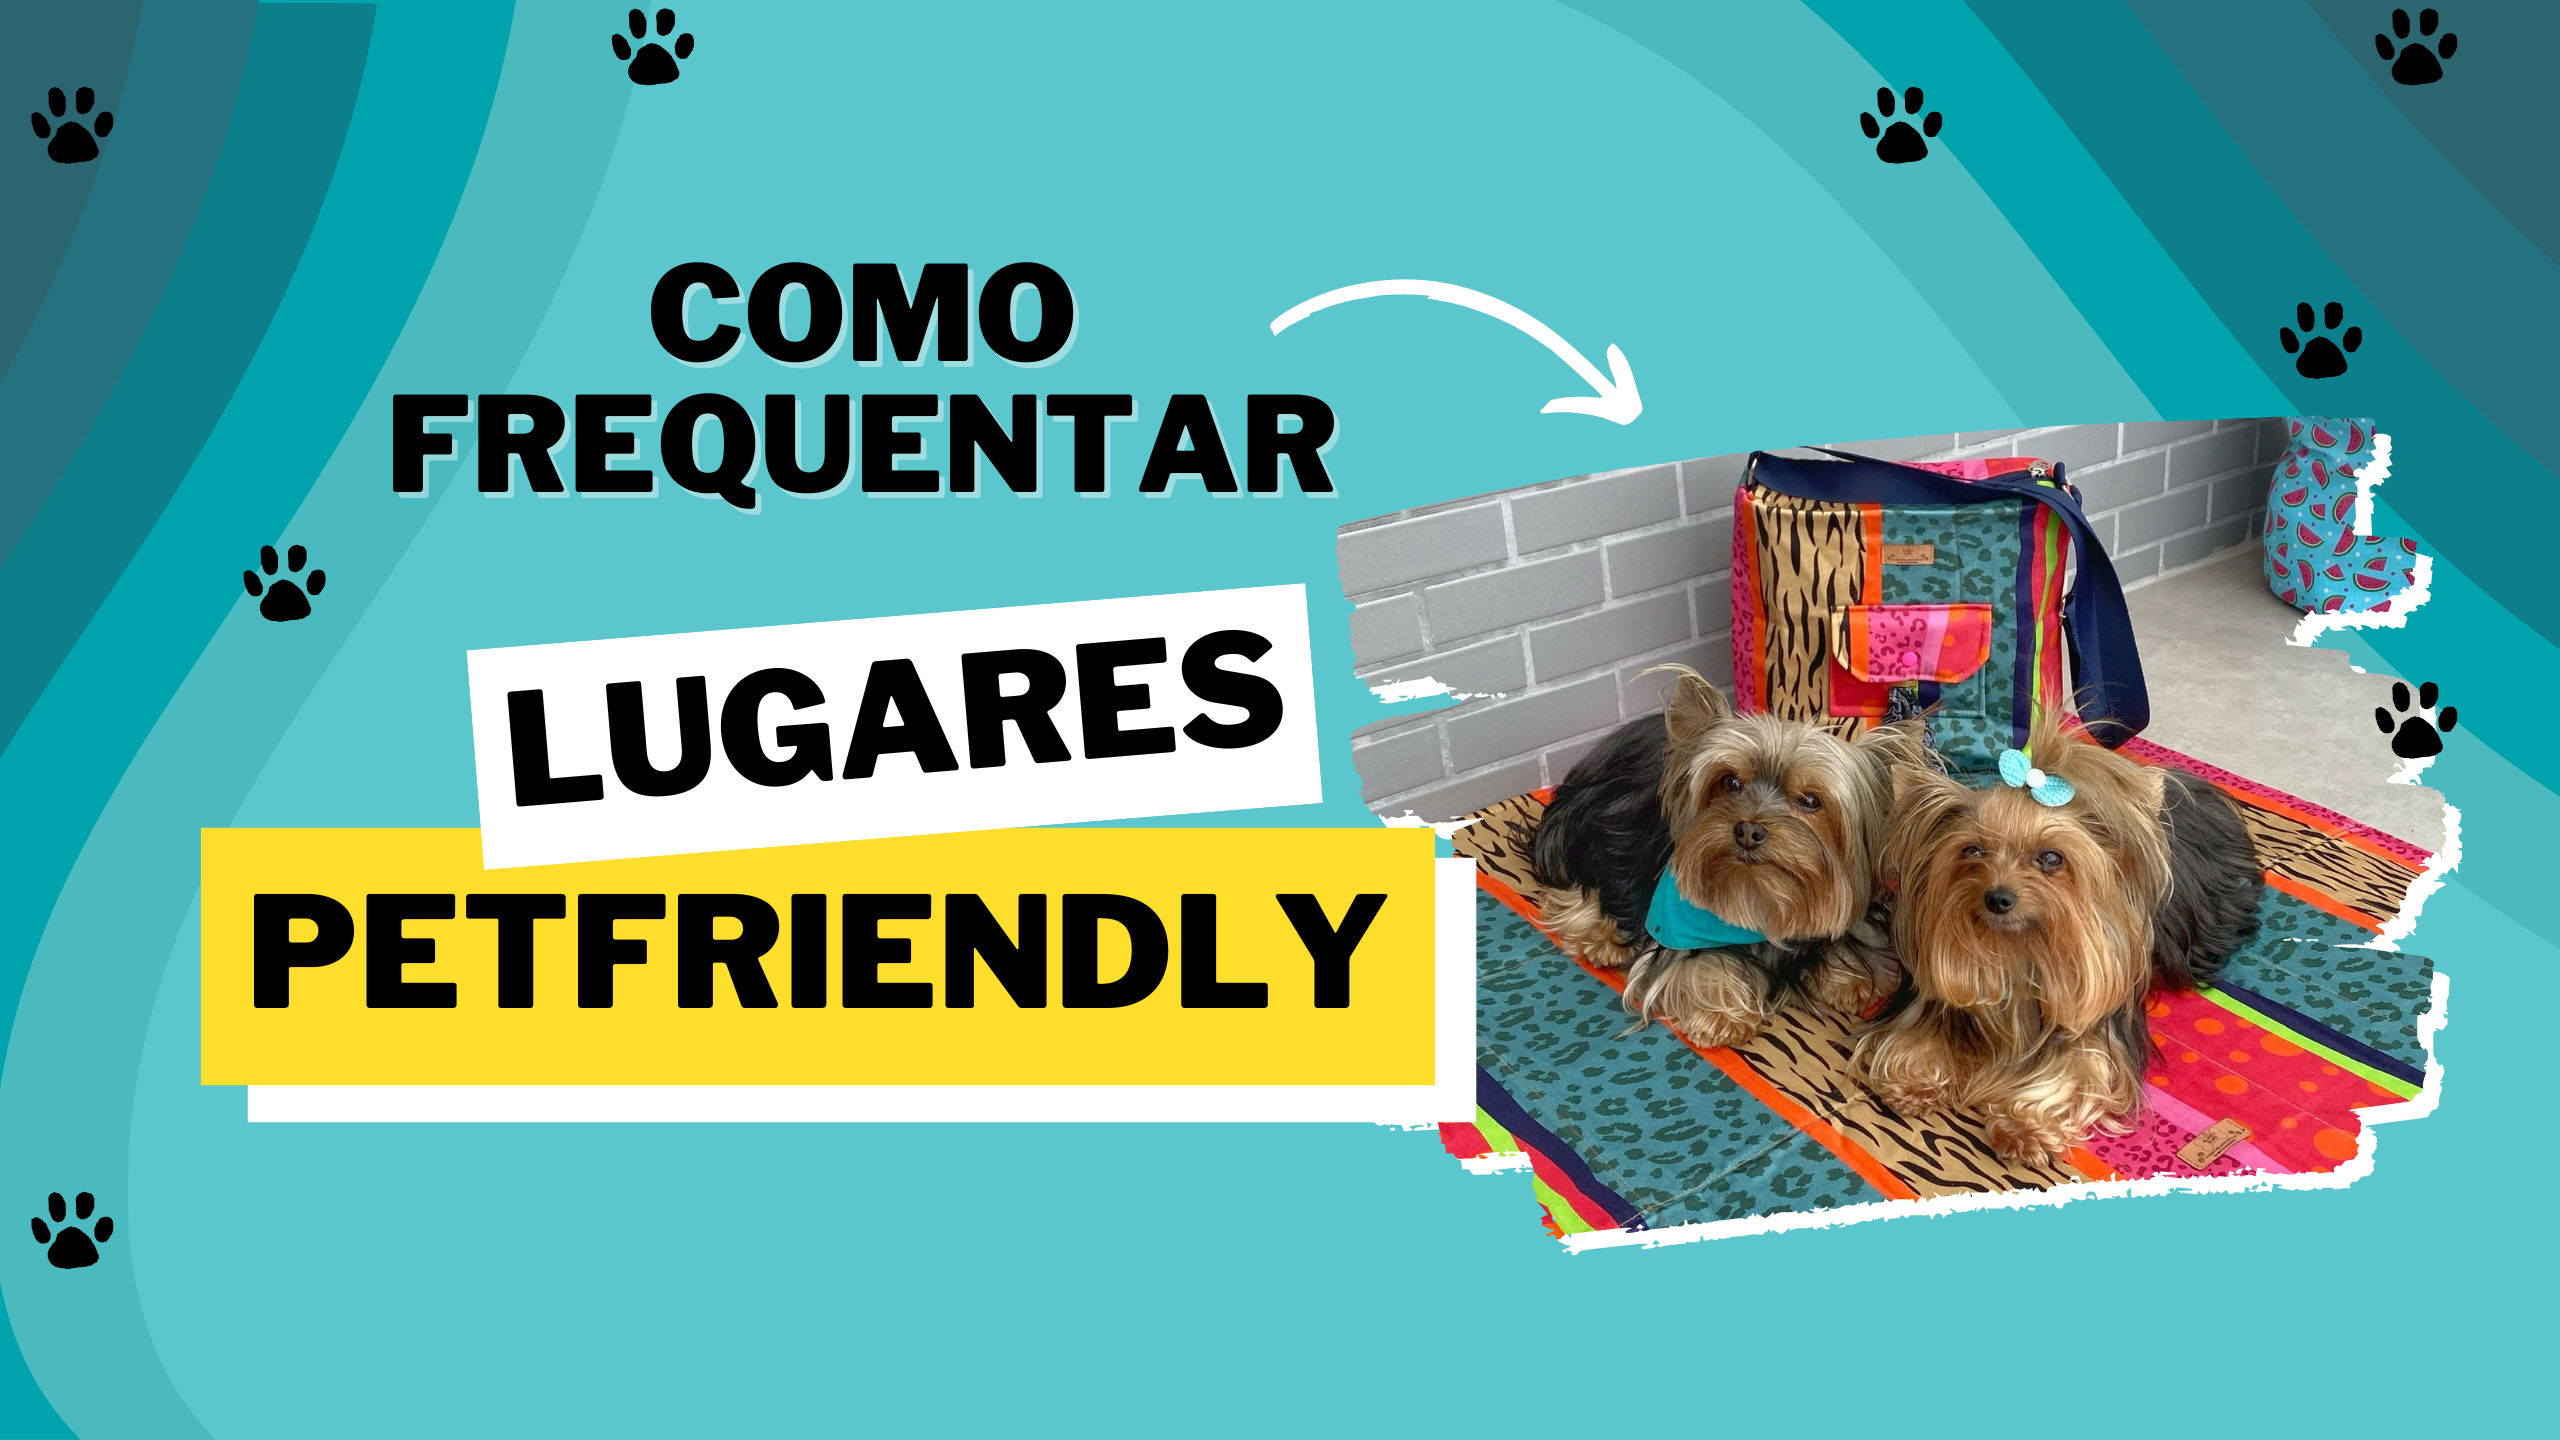 https://cdn.guiase.net/wp-content/uploads/sites/673/2022/11/como-frequentar-lugares-petfriendly-3.png